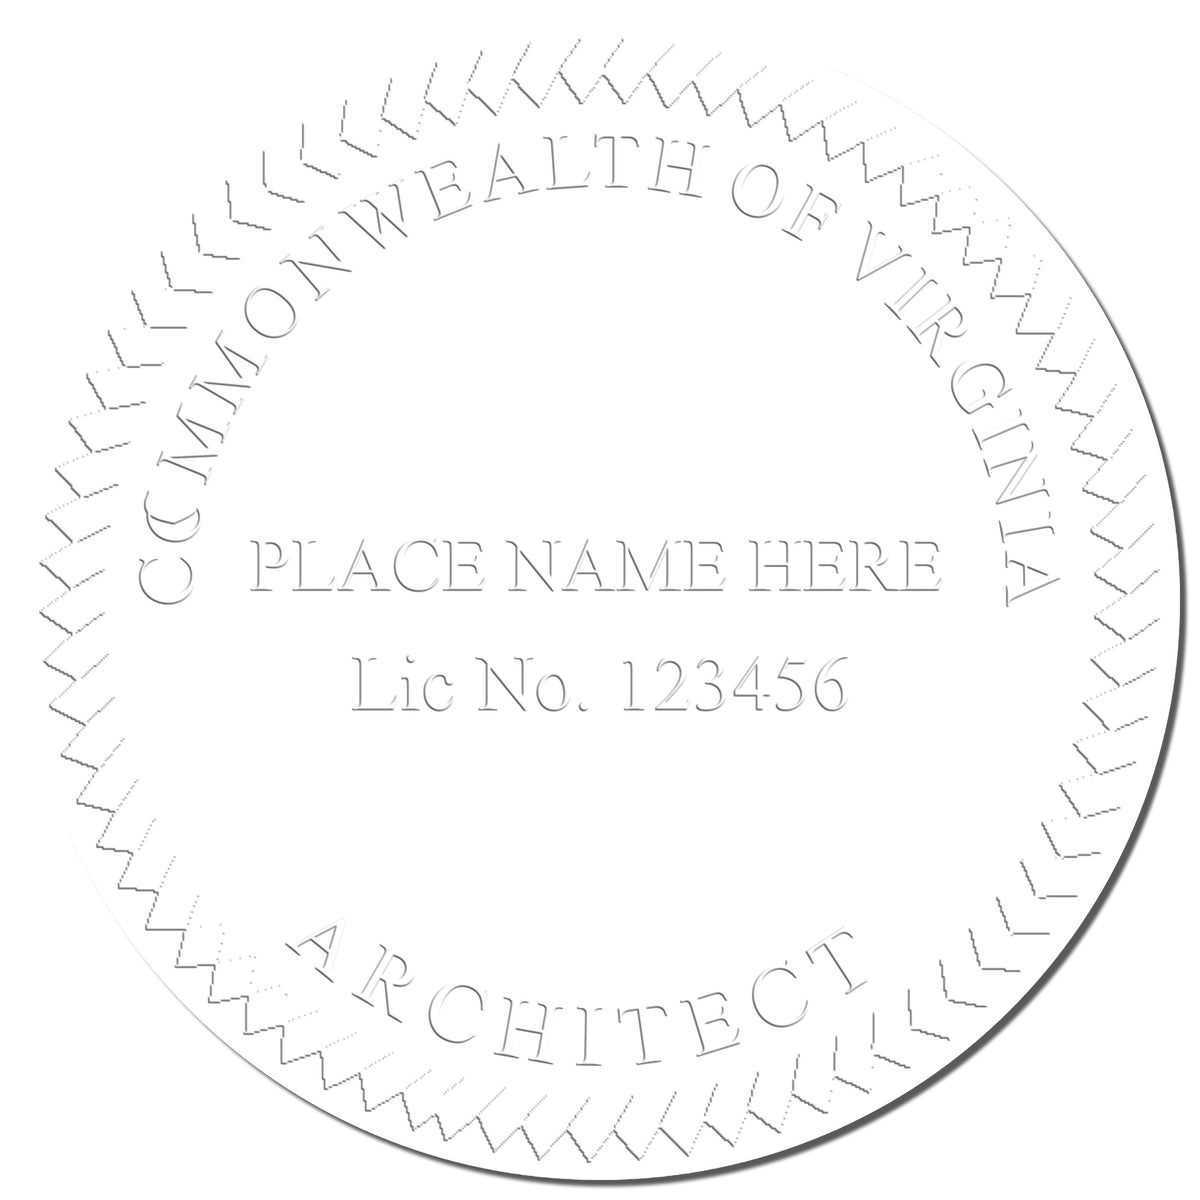 This paper is stamped with a sample imprint of the State of Virginia Architectural Seal Embosser, signifying its quality and reliability.